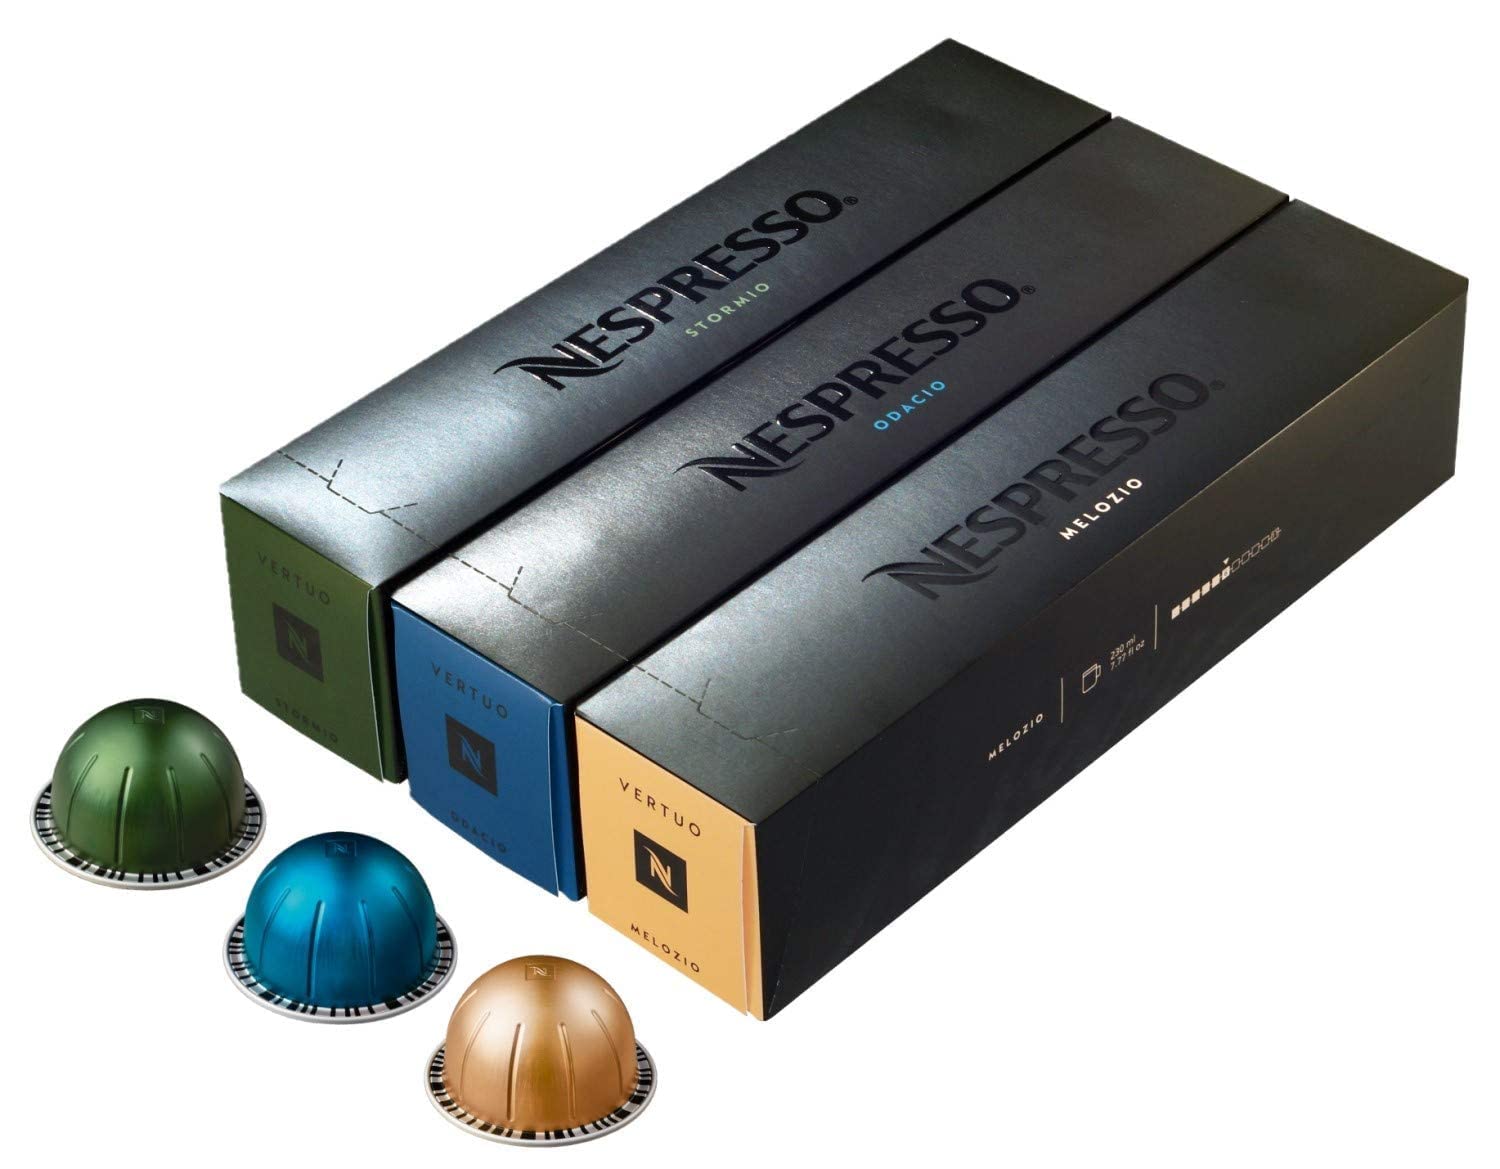 Nespresso Vertuoline Coffee Capsules Assortment - The Best Sellers: 1 Sleeve of Stormio, Odacio and Melozio for a Total of 30 Capsules by Nespresso